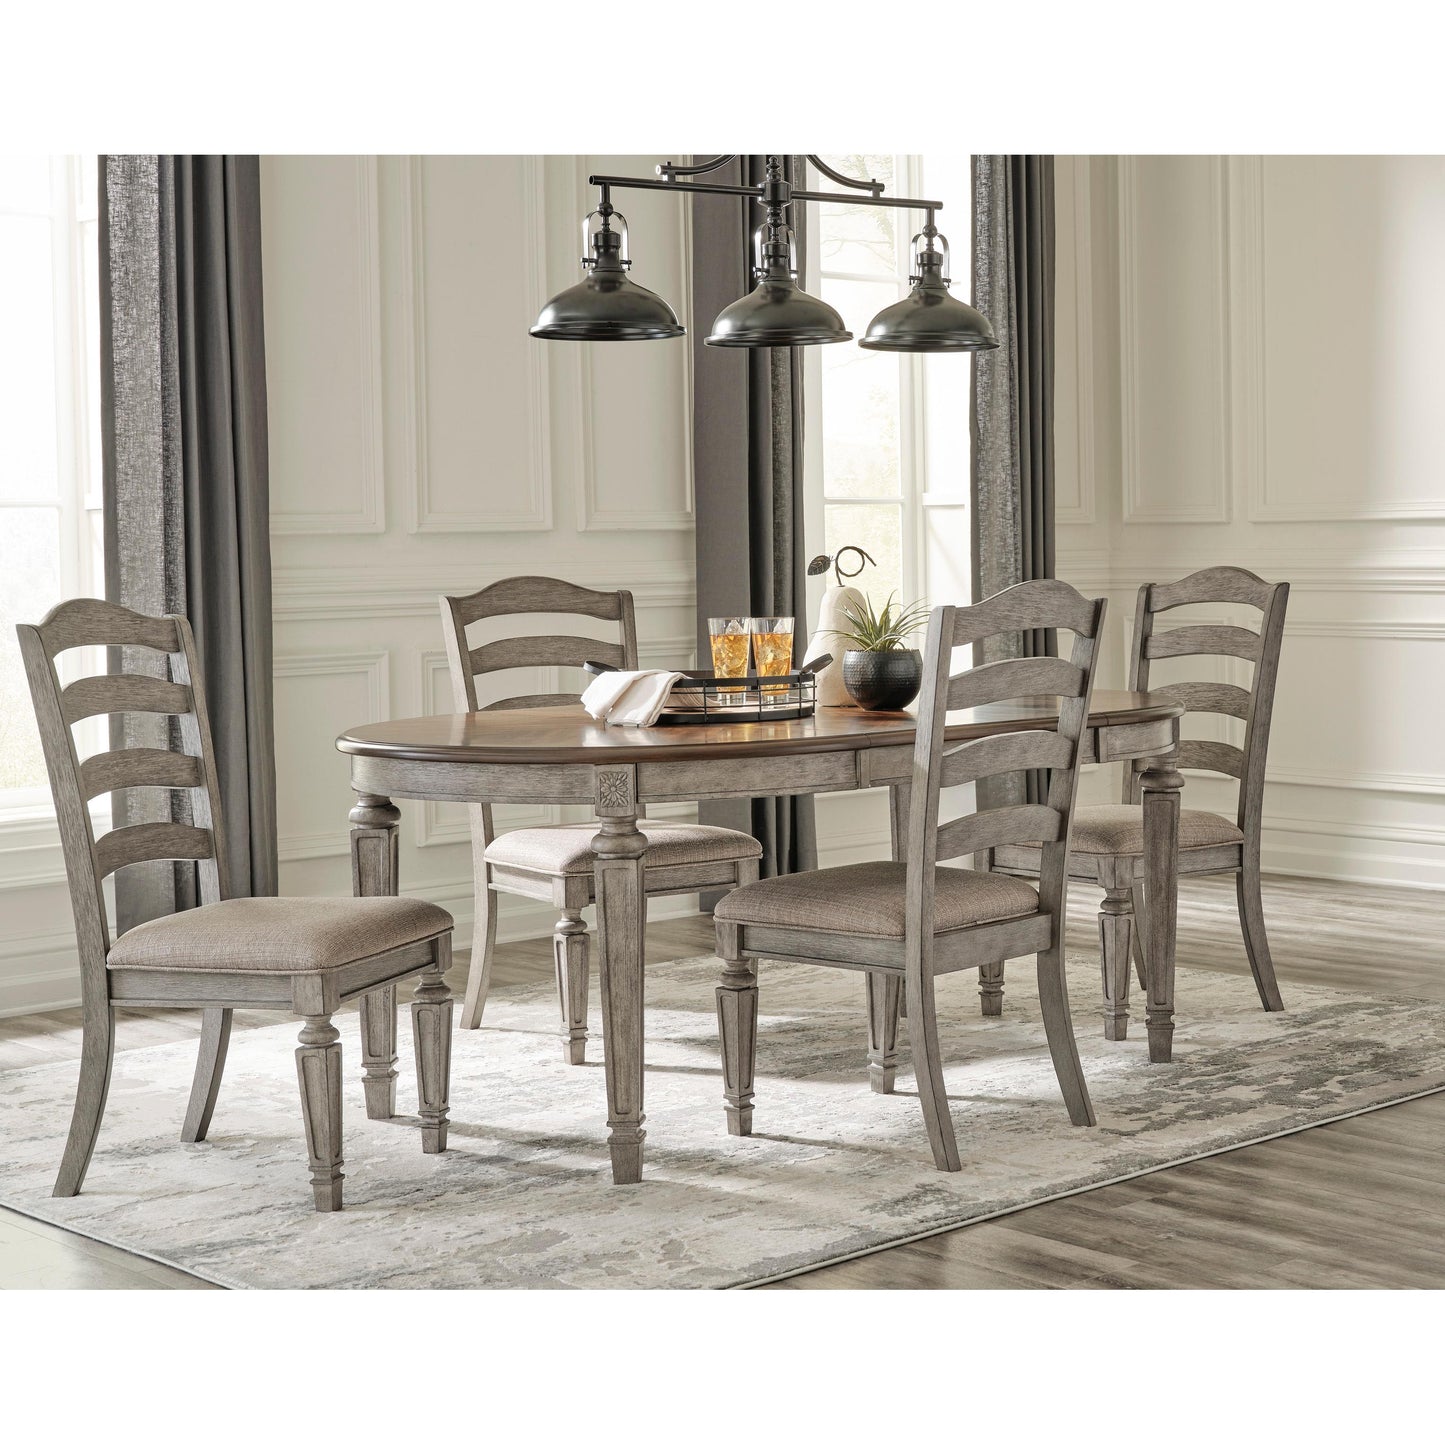 Signature Design by Ashley Lodenbay D751D1 5 pc Dining Set